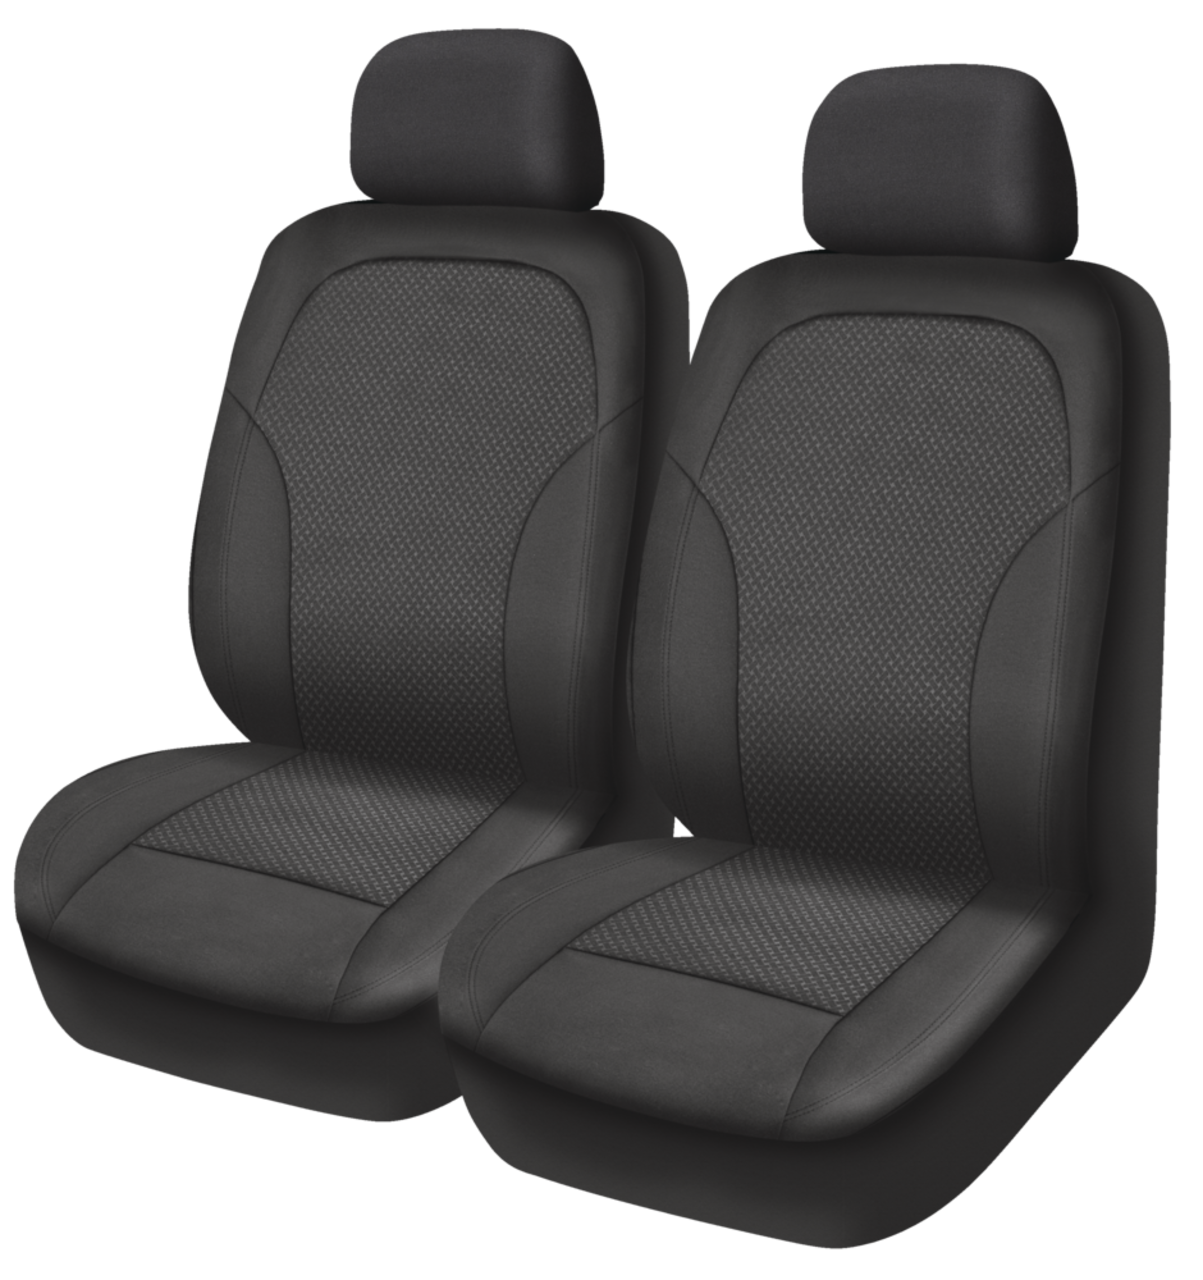 Seat cover KfZ Seating protective protective coverage. – Flex